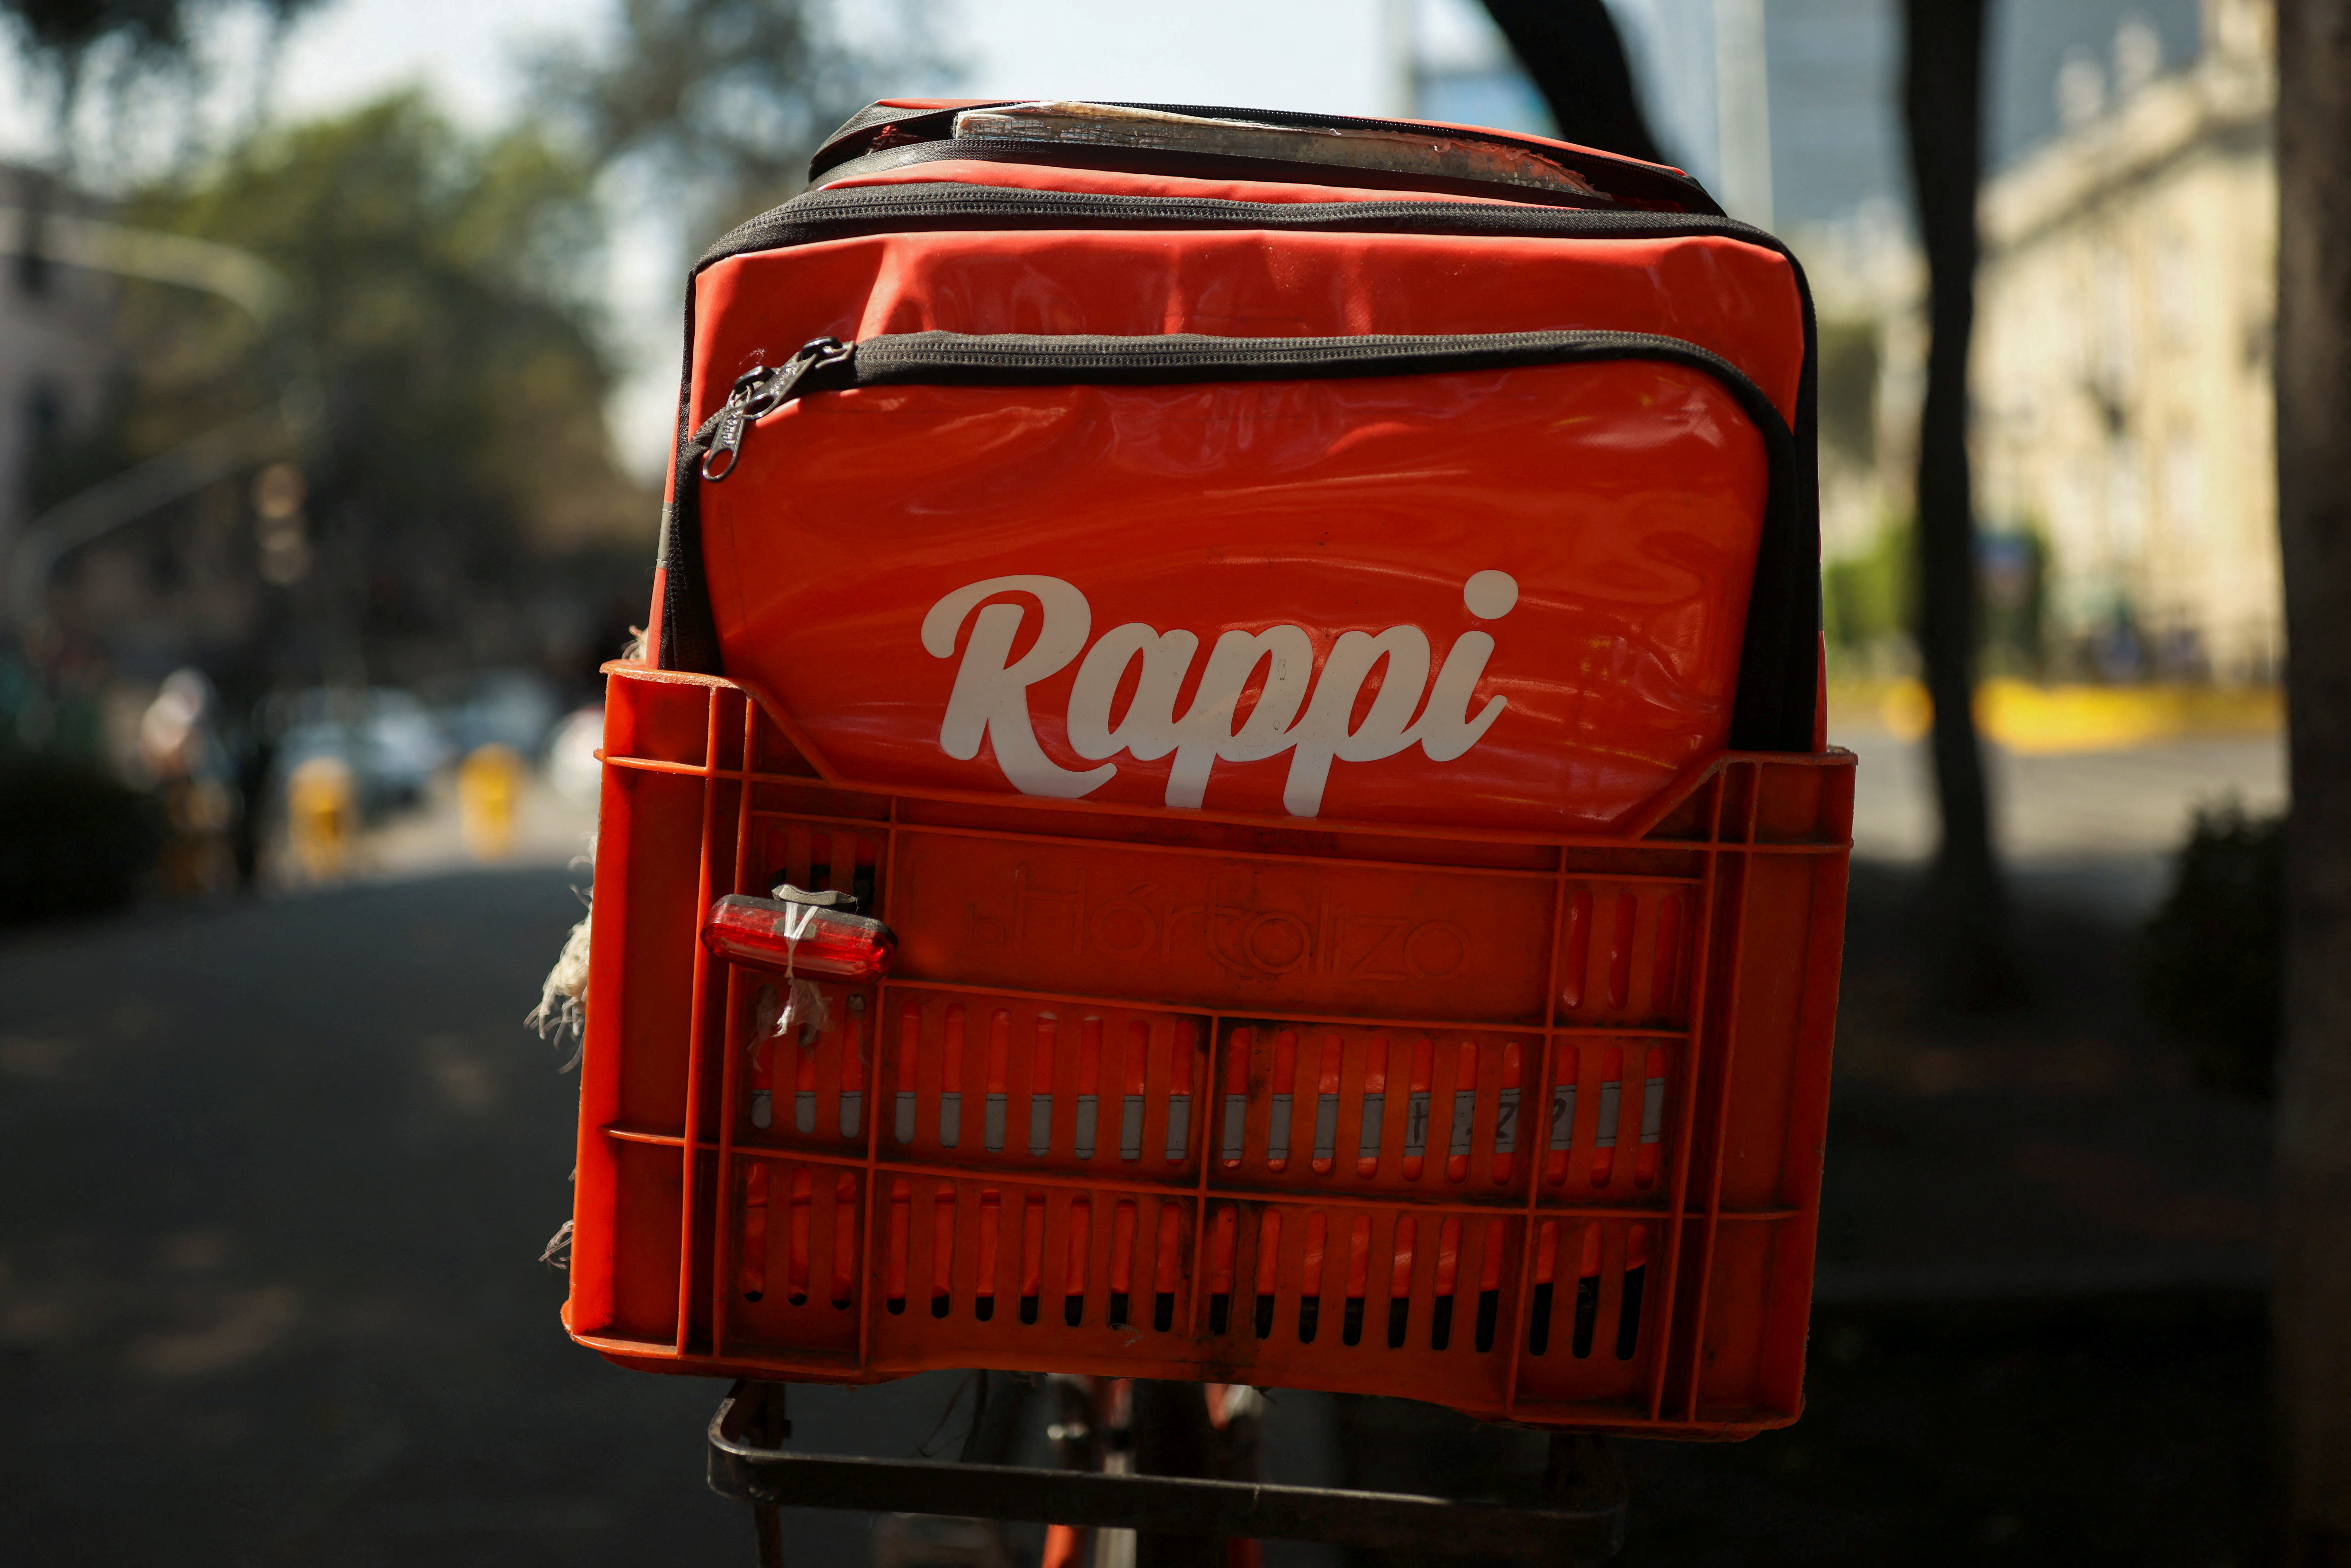 The logo of Colombian on-demand delivery company Rappi is seen on a delivery bag in Mexico City